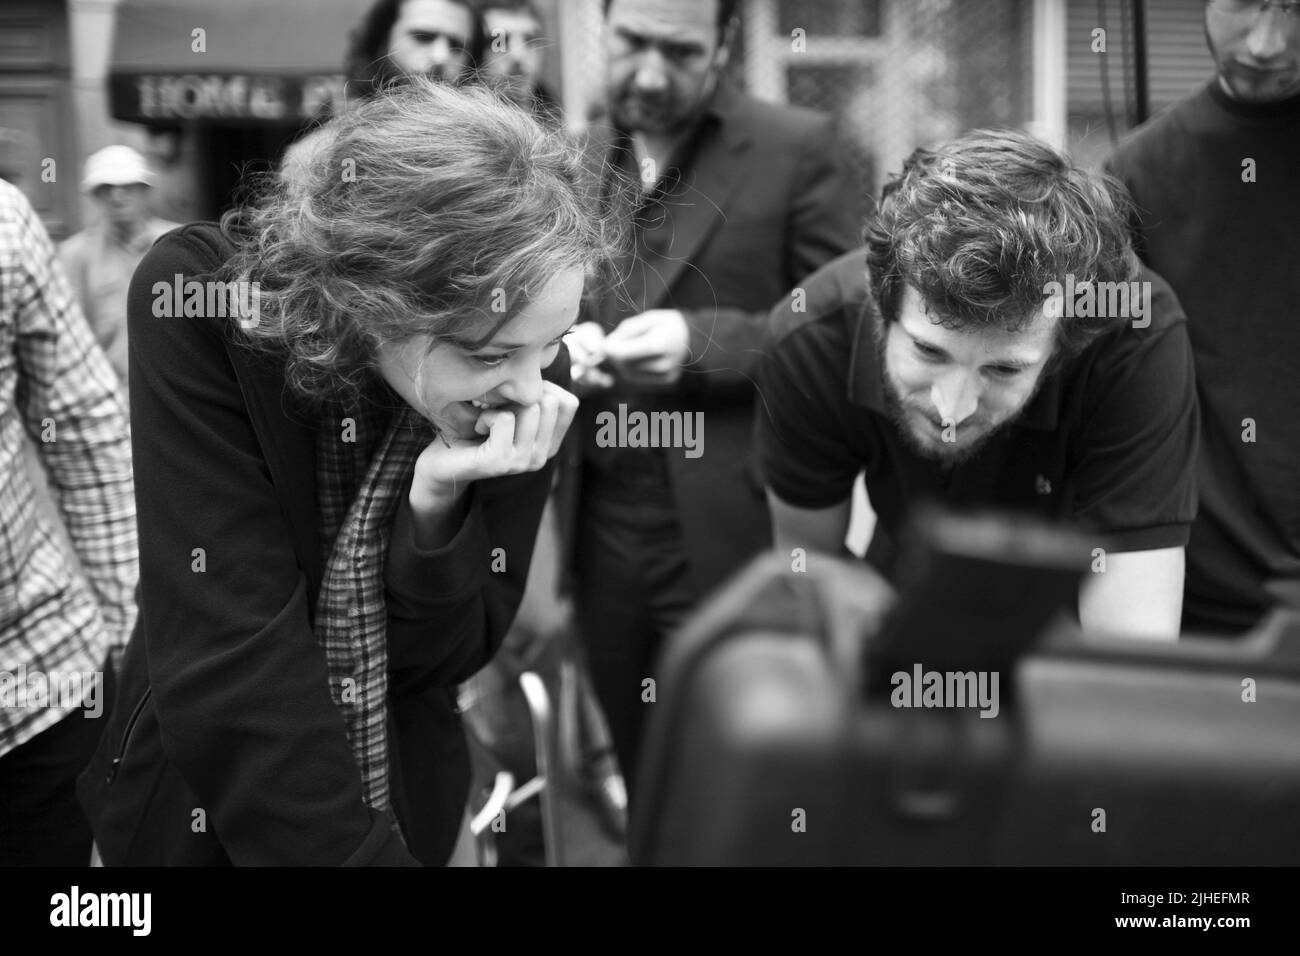 Guillaume canet Black and White Stock Photos & Images - Alamy